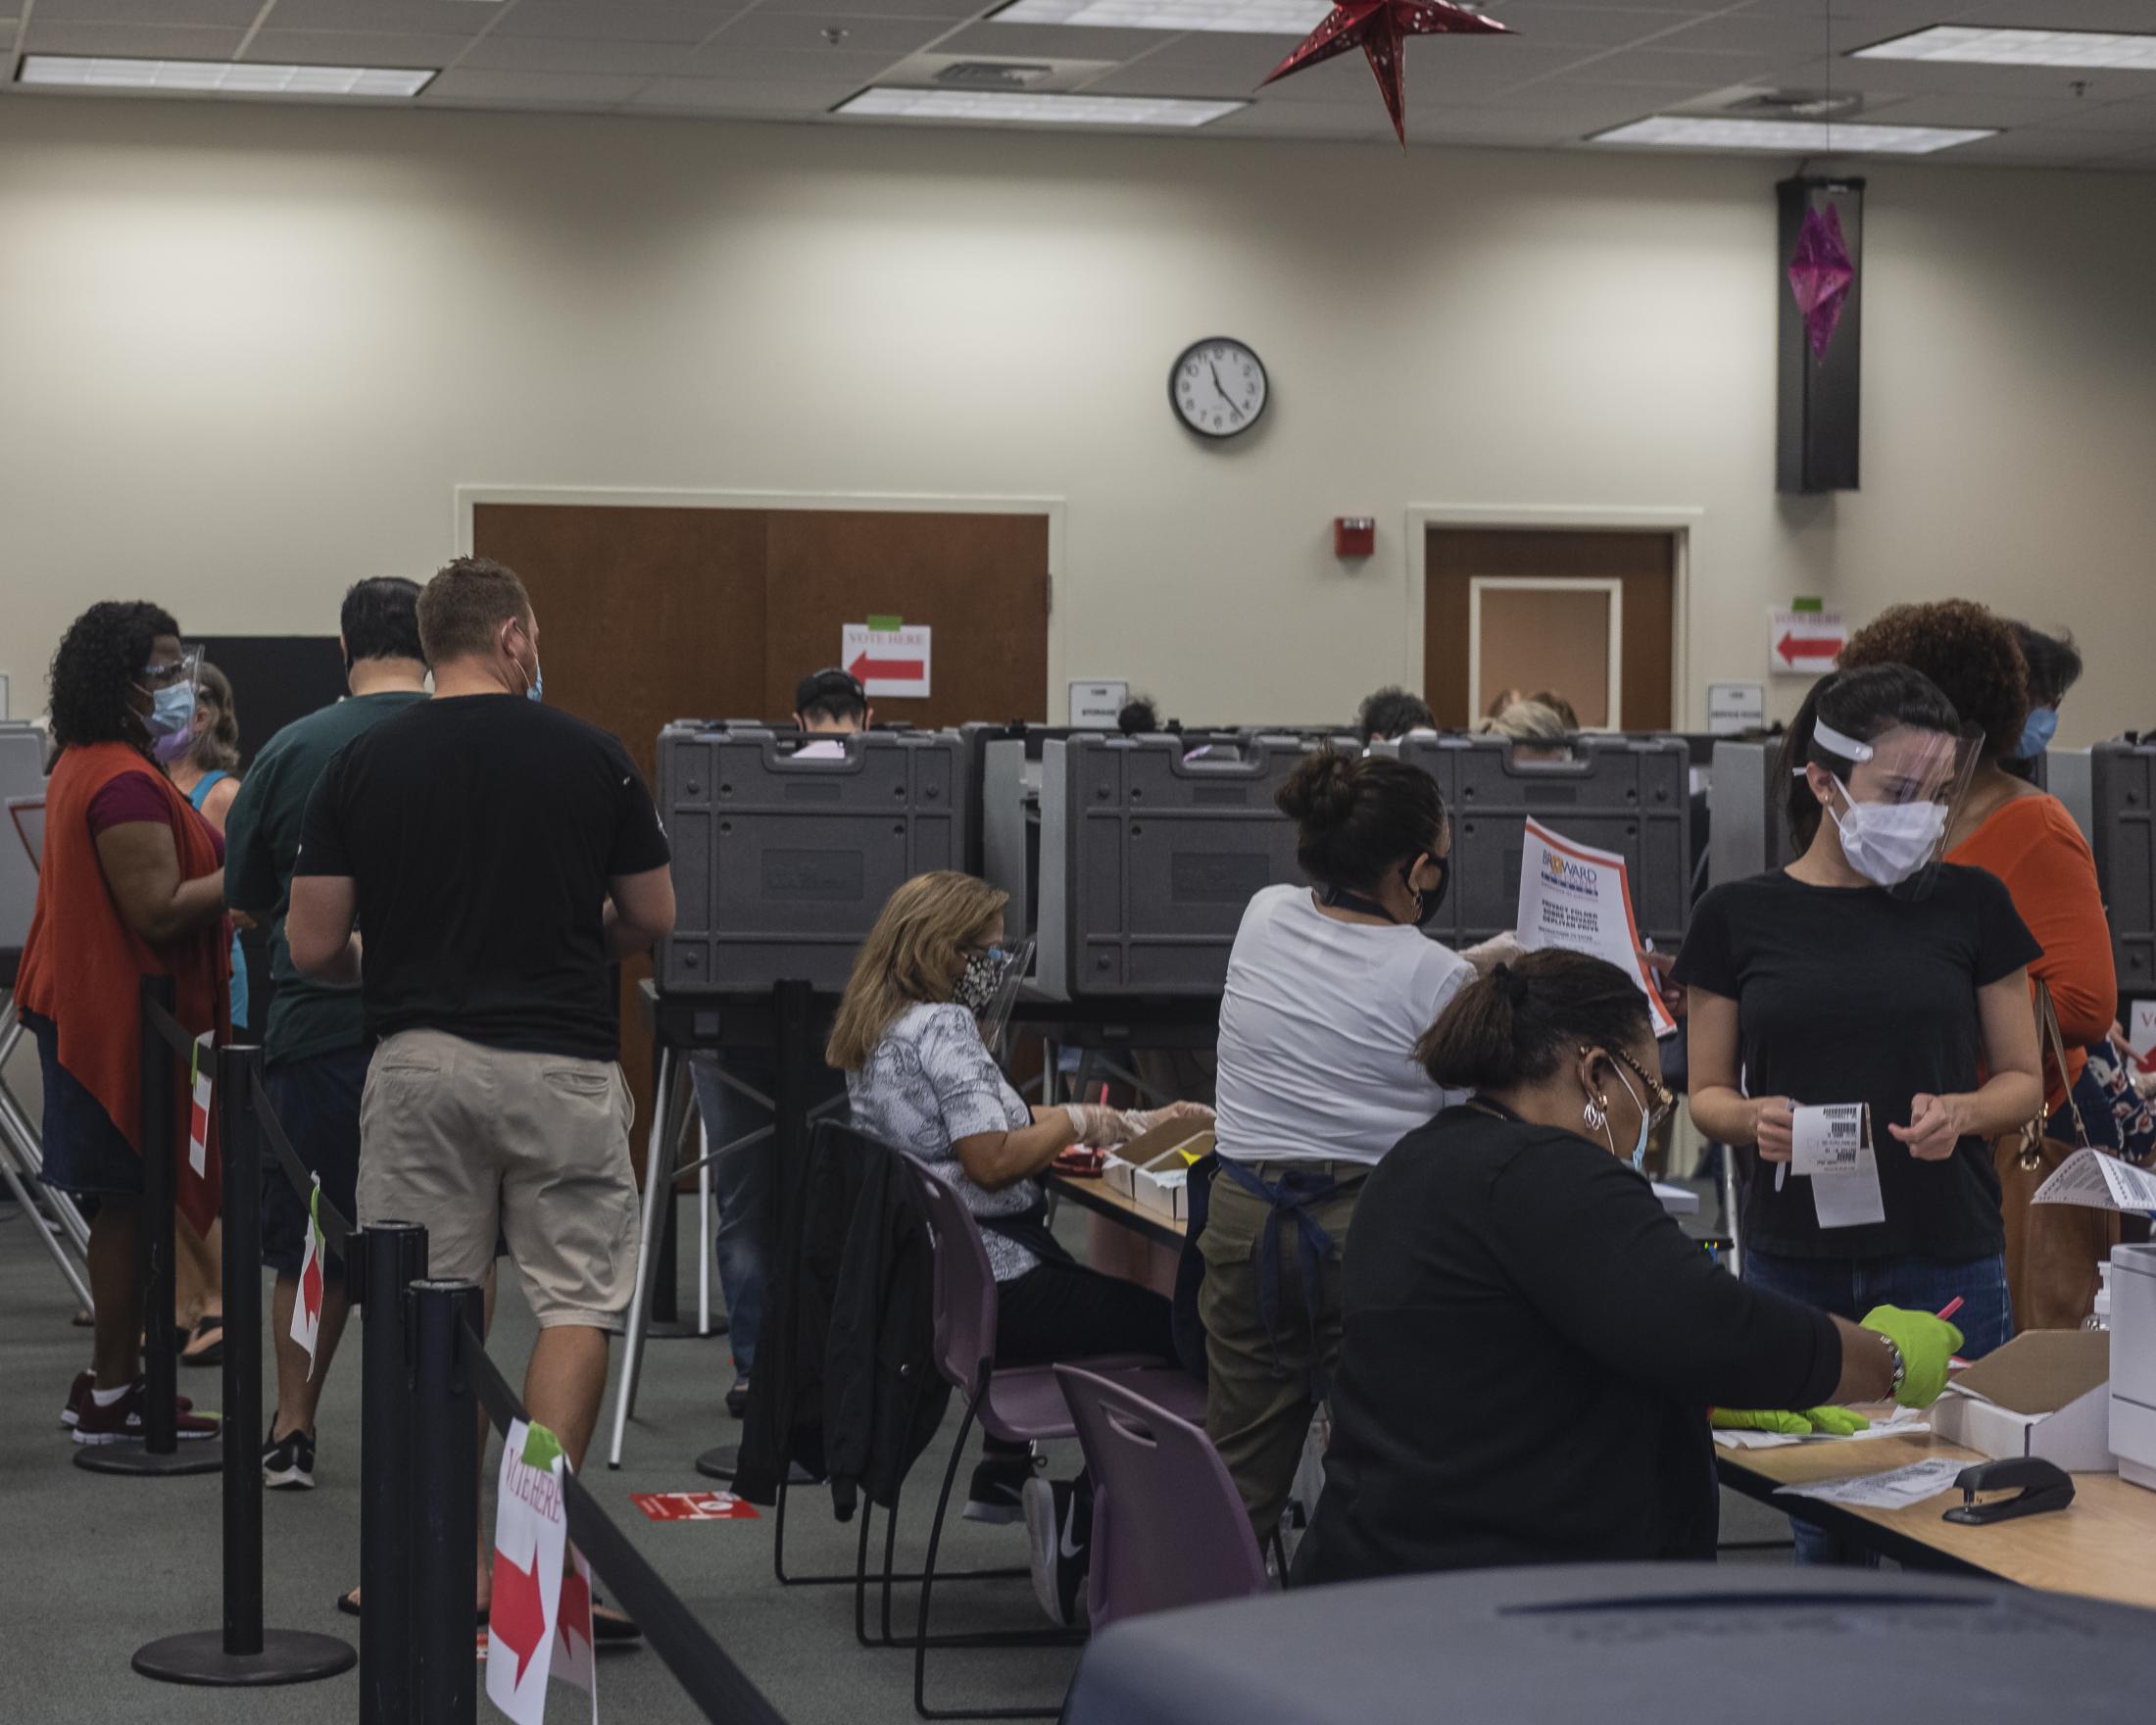  Early voters waiting their turn to vote and checking in with poll workers inside of the Broward County Library Weston Branch - an early voting location.&nbsp; Weston, Fl. November 3, 2020.&nbsp; Credit: Andr&eacute;s Guerrero 